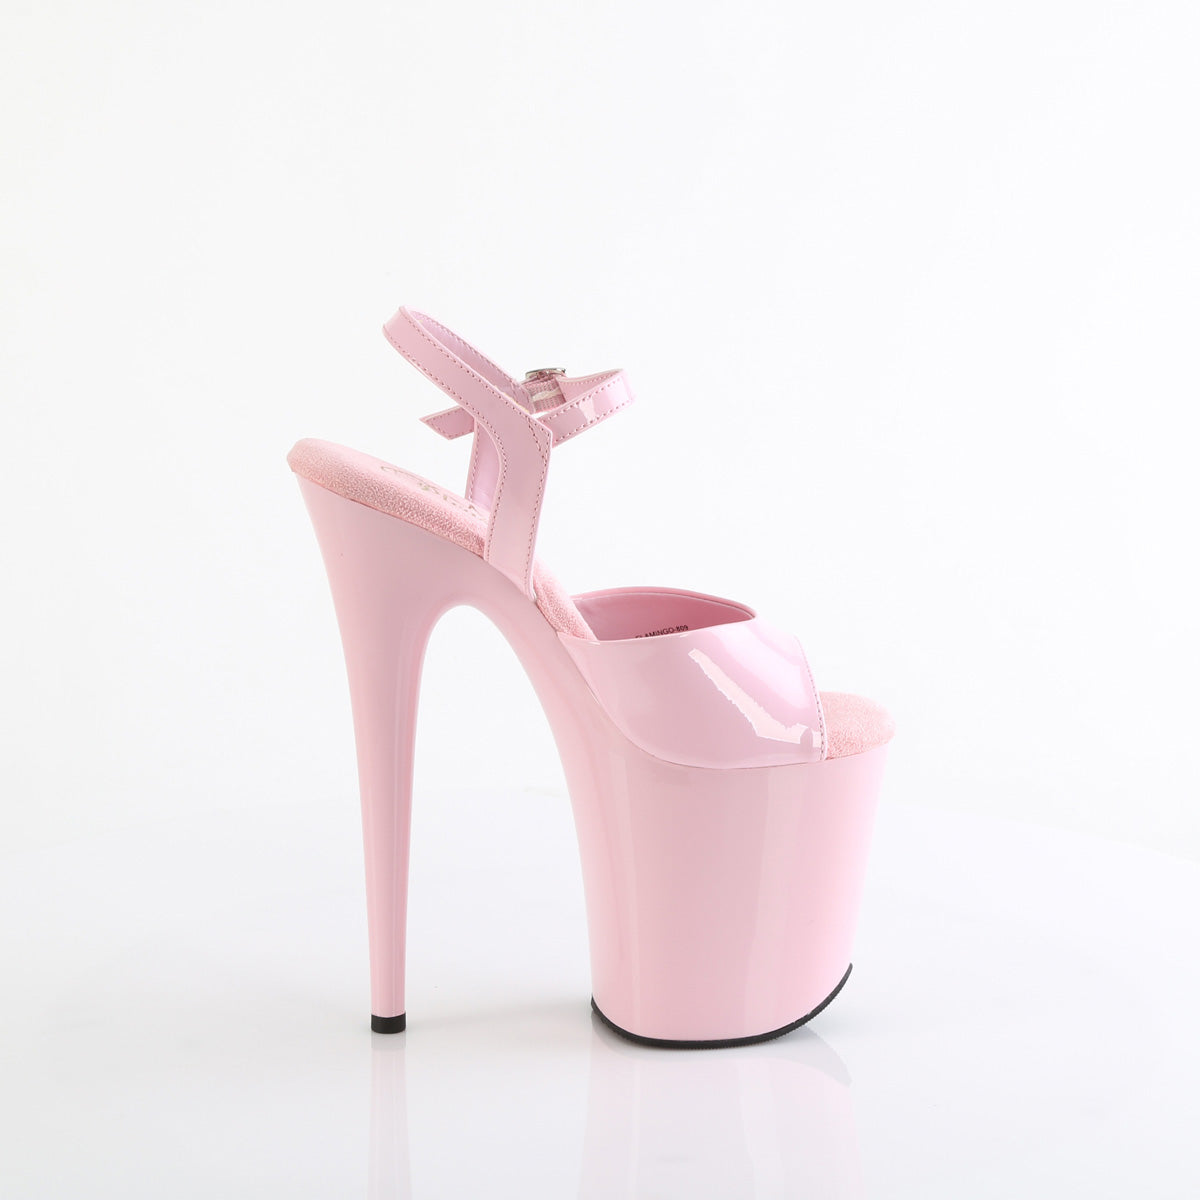 FLAMINGO-809 / BP / M 8 "PLEASER FAST DELIVERY 24-48h 